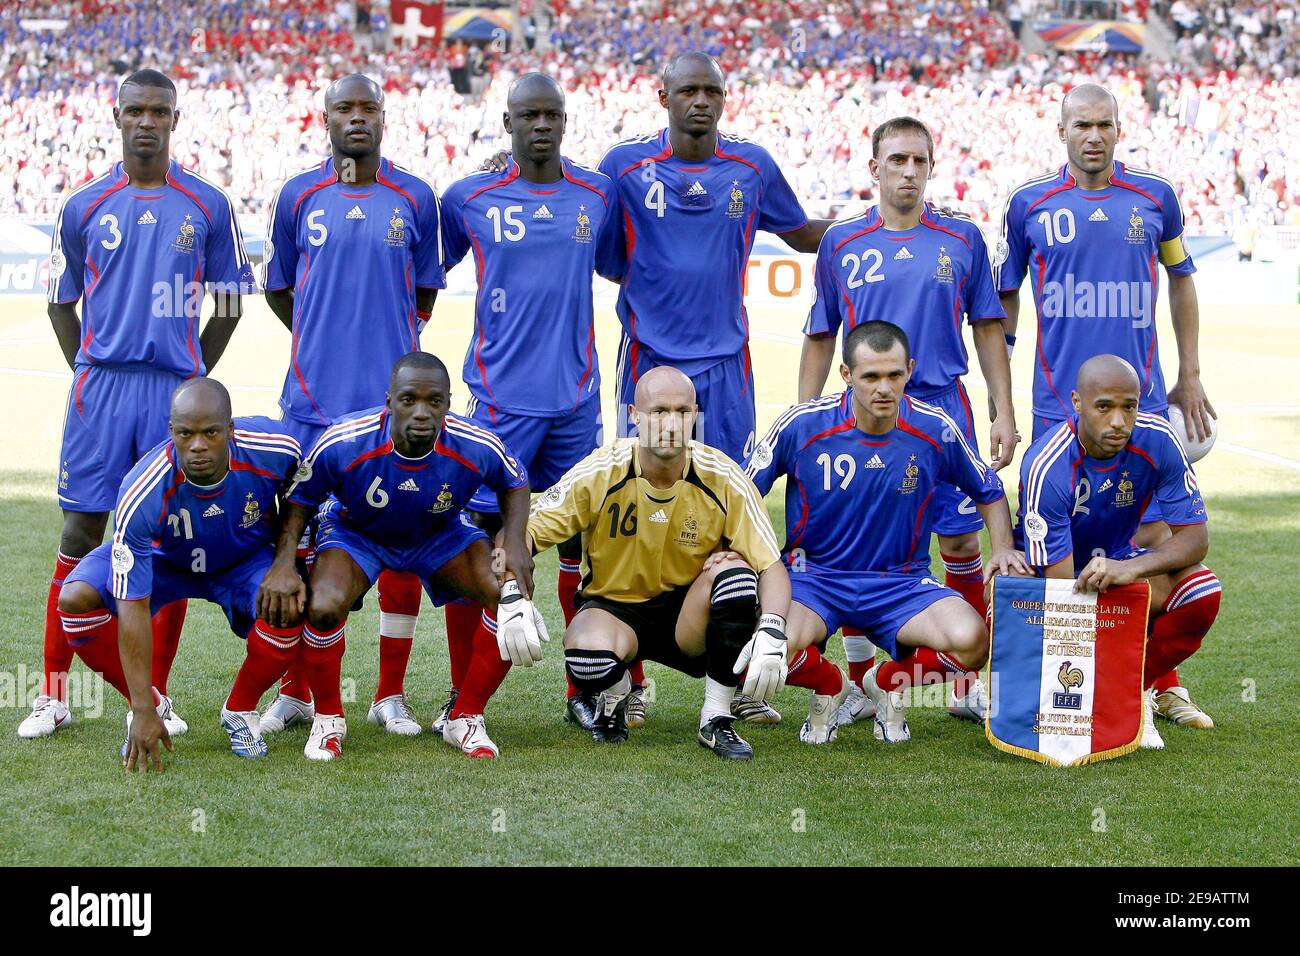 France's soccer team during the World Cup 2006, Group G, France vs  Switzerland in Stuttgart, Germany on June 13, 2006. The match ended in 0-0  draw. Photo by Christian Liewig/ABACAPRESS.COM Stock Photo - Alamy